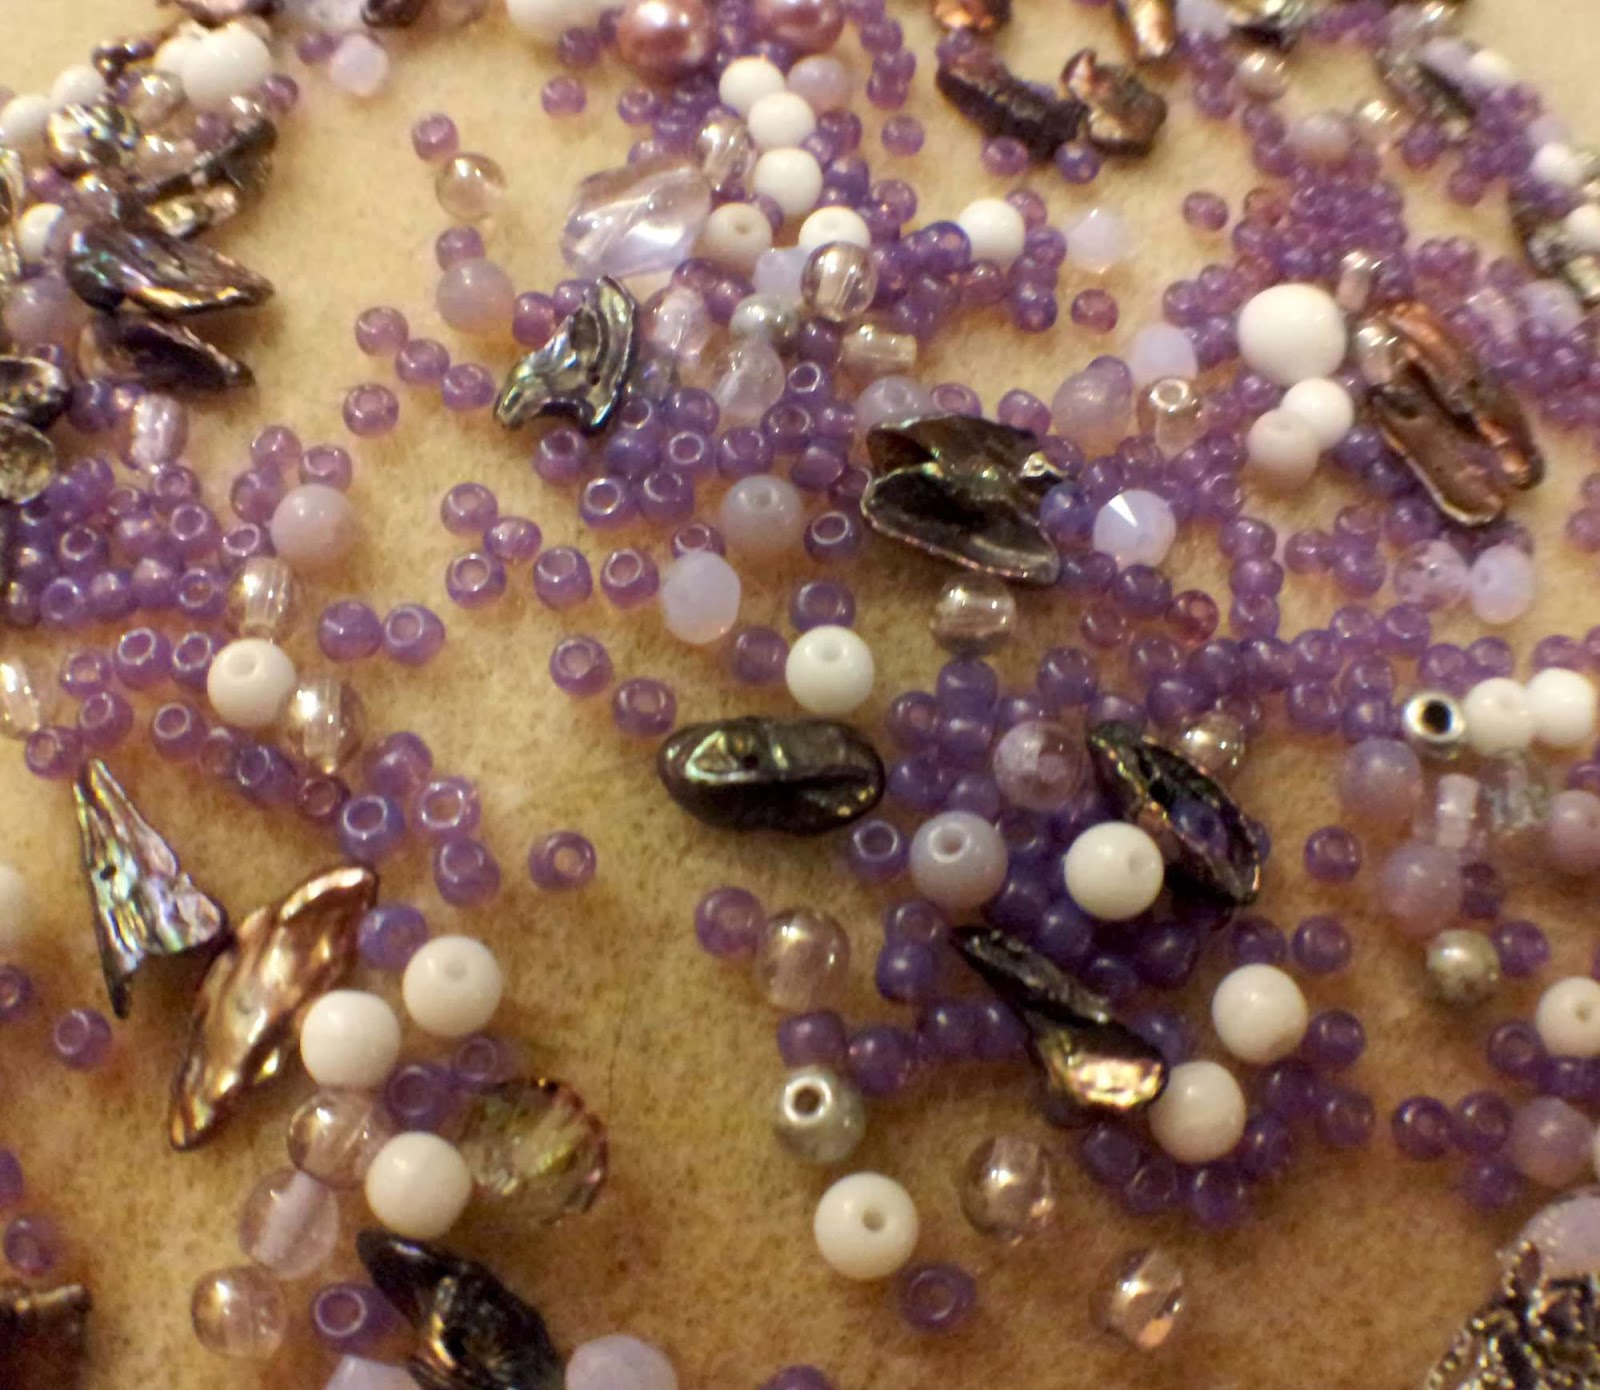 Into the forest elements: purple, white, and silver beads in various mediums (glass, ceramic, metal, glass pearls, mother of pearl) and teeny-tiny seed beads, along with a tree ceramic focal by Marla James :: All Pretty Things